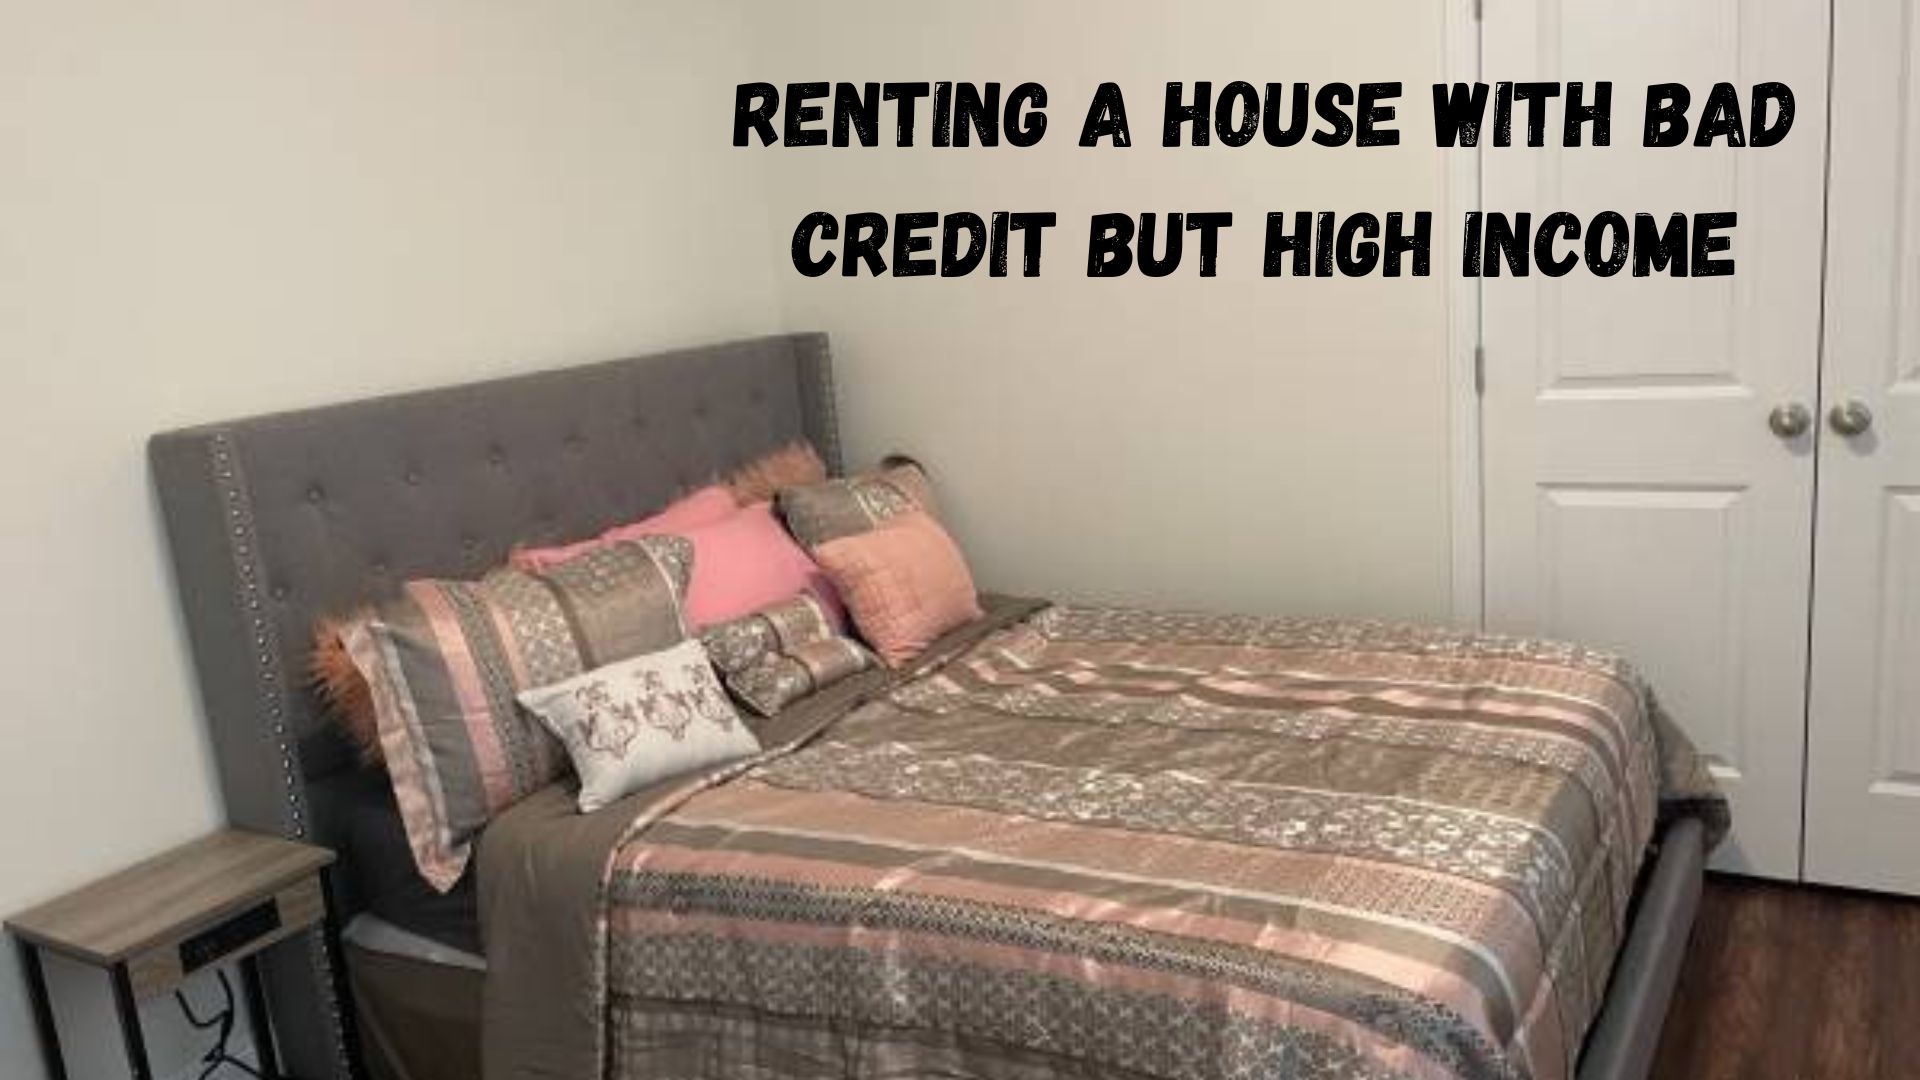 Renting a House with Bad Credit but High Income.